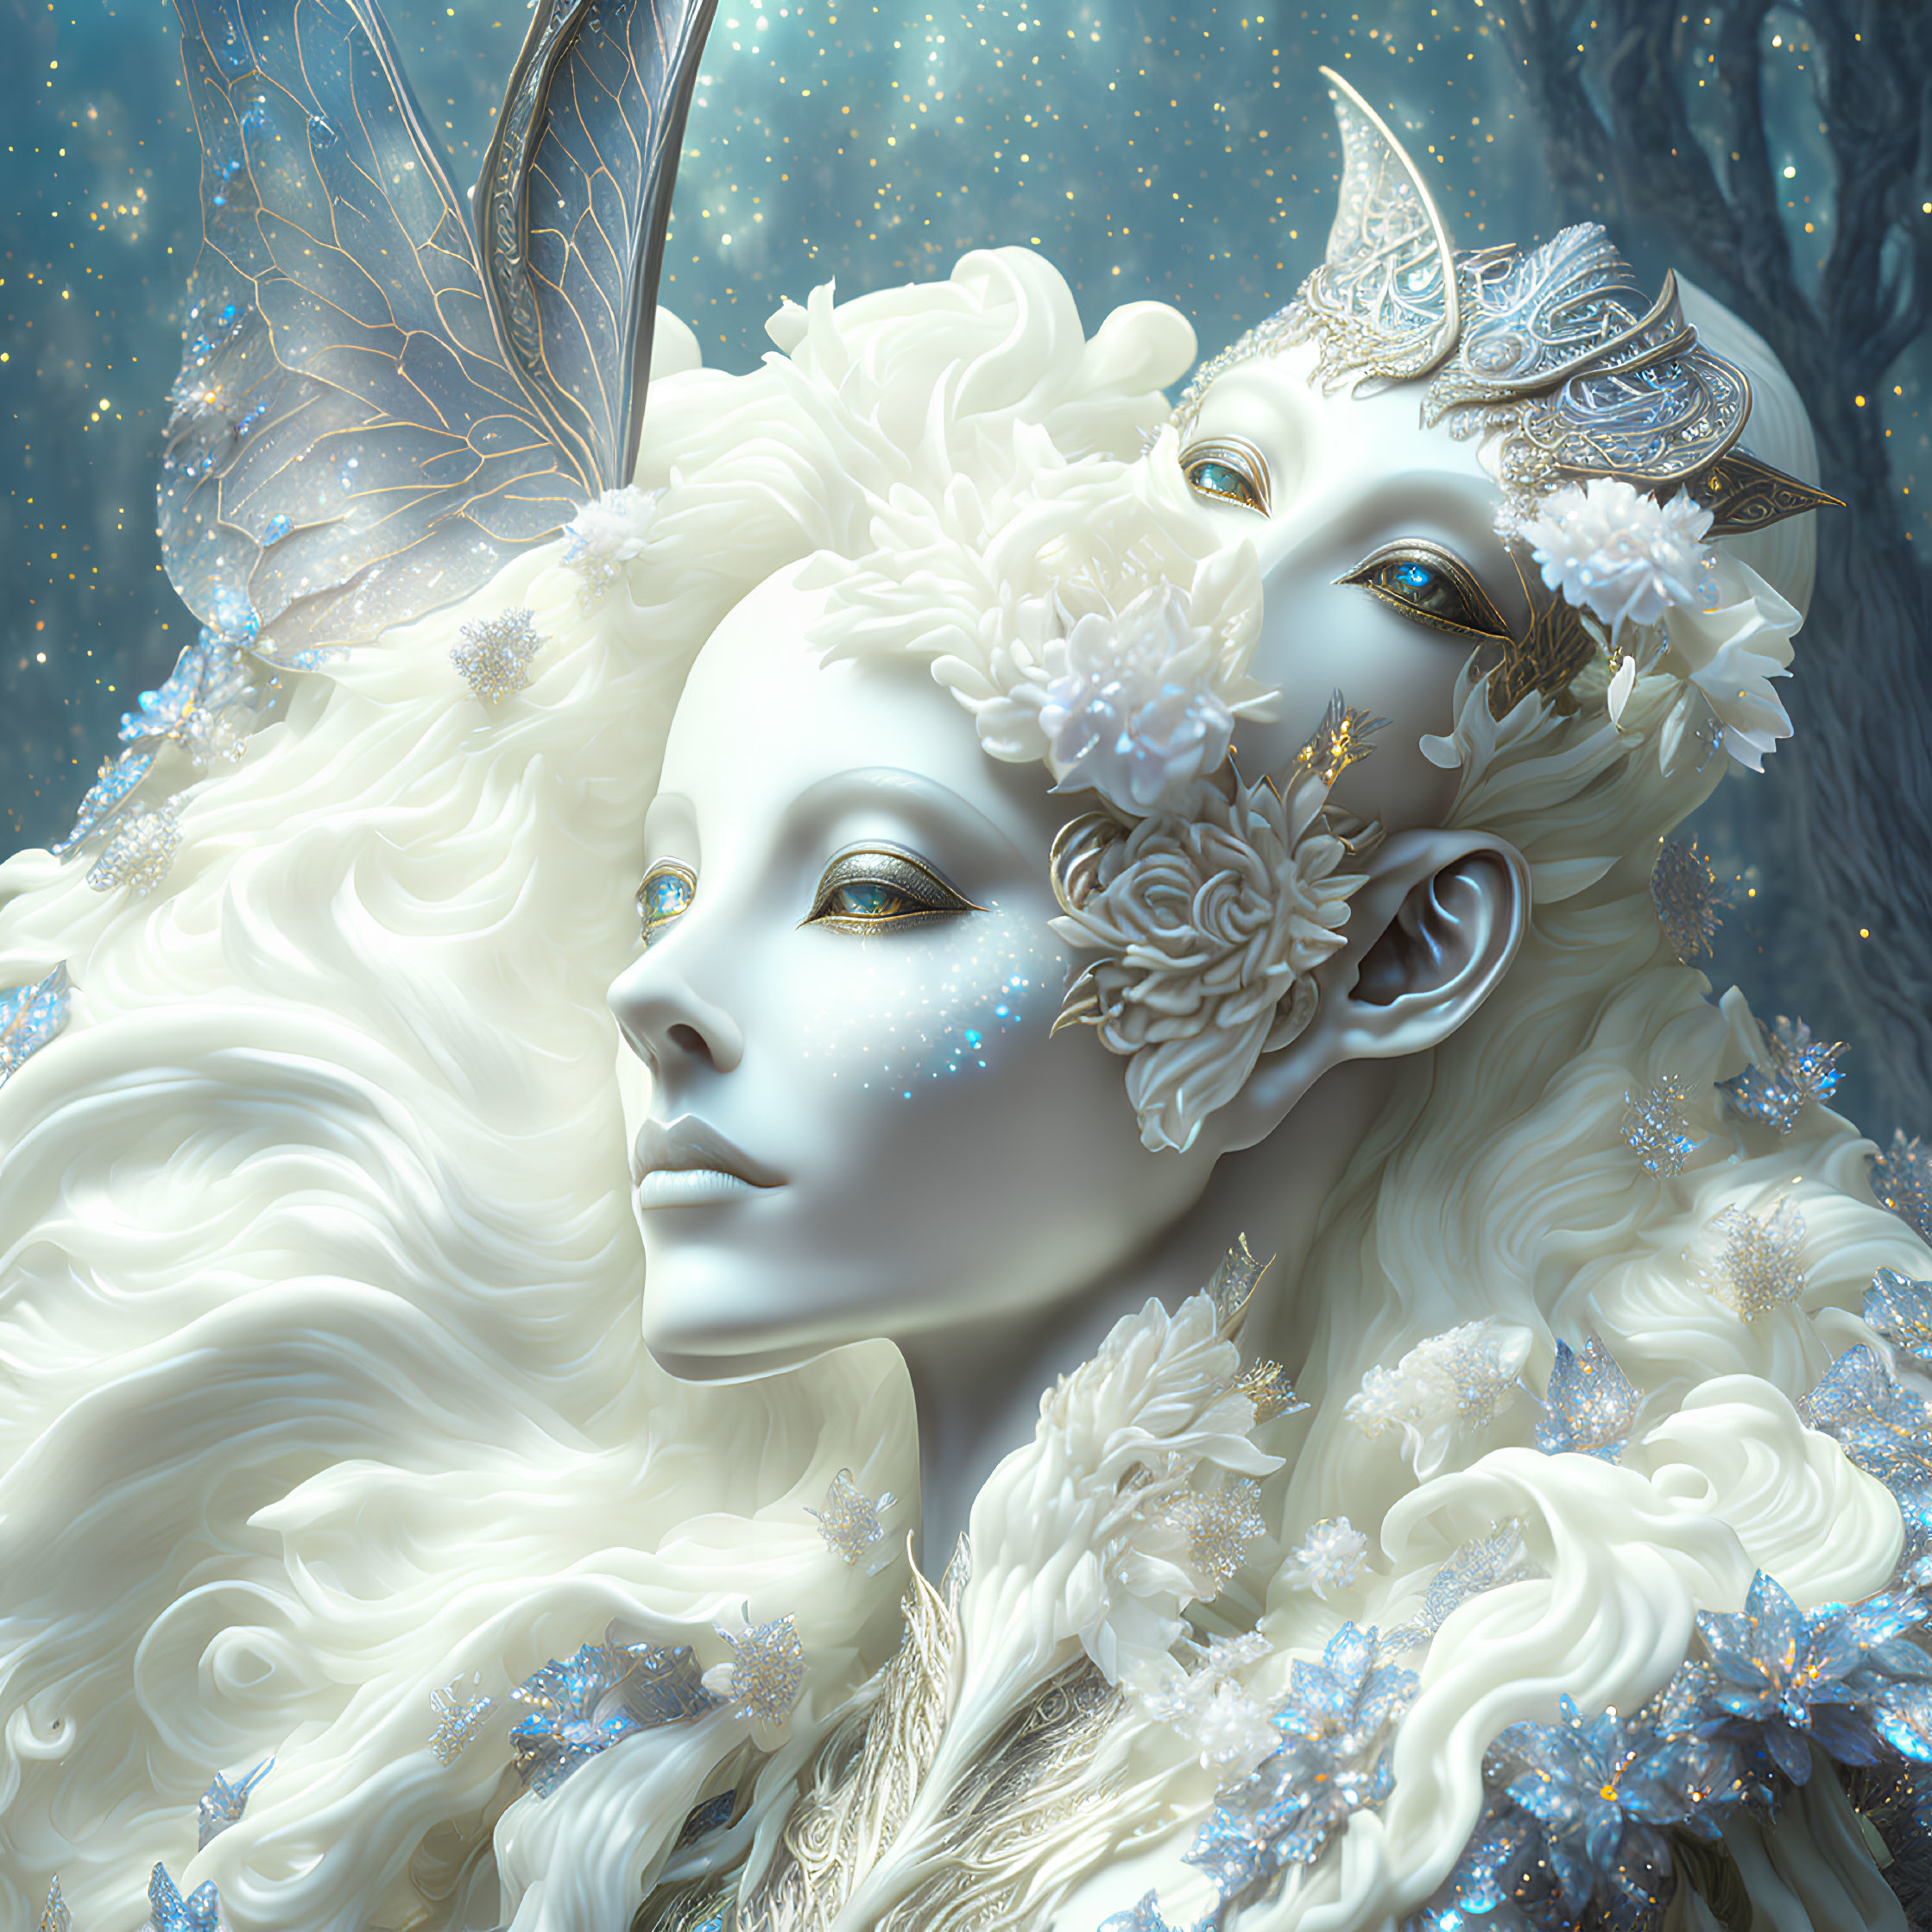 Ethereal being with alabaster skin, silver headpieces, icy blue flowers, and butterfly